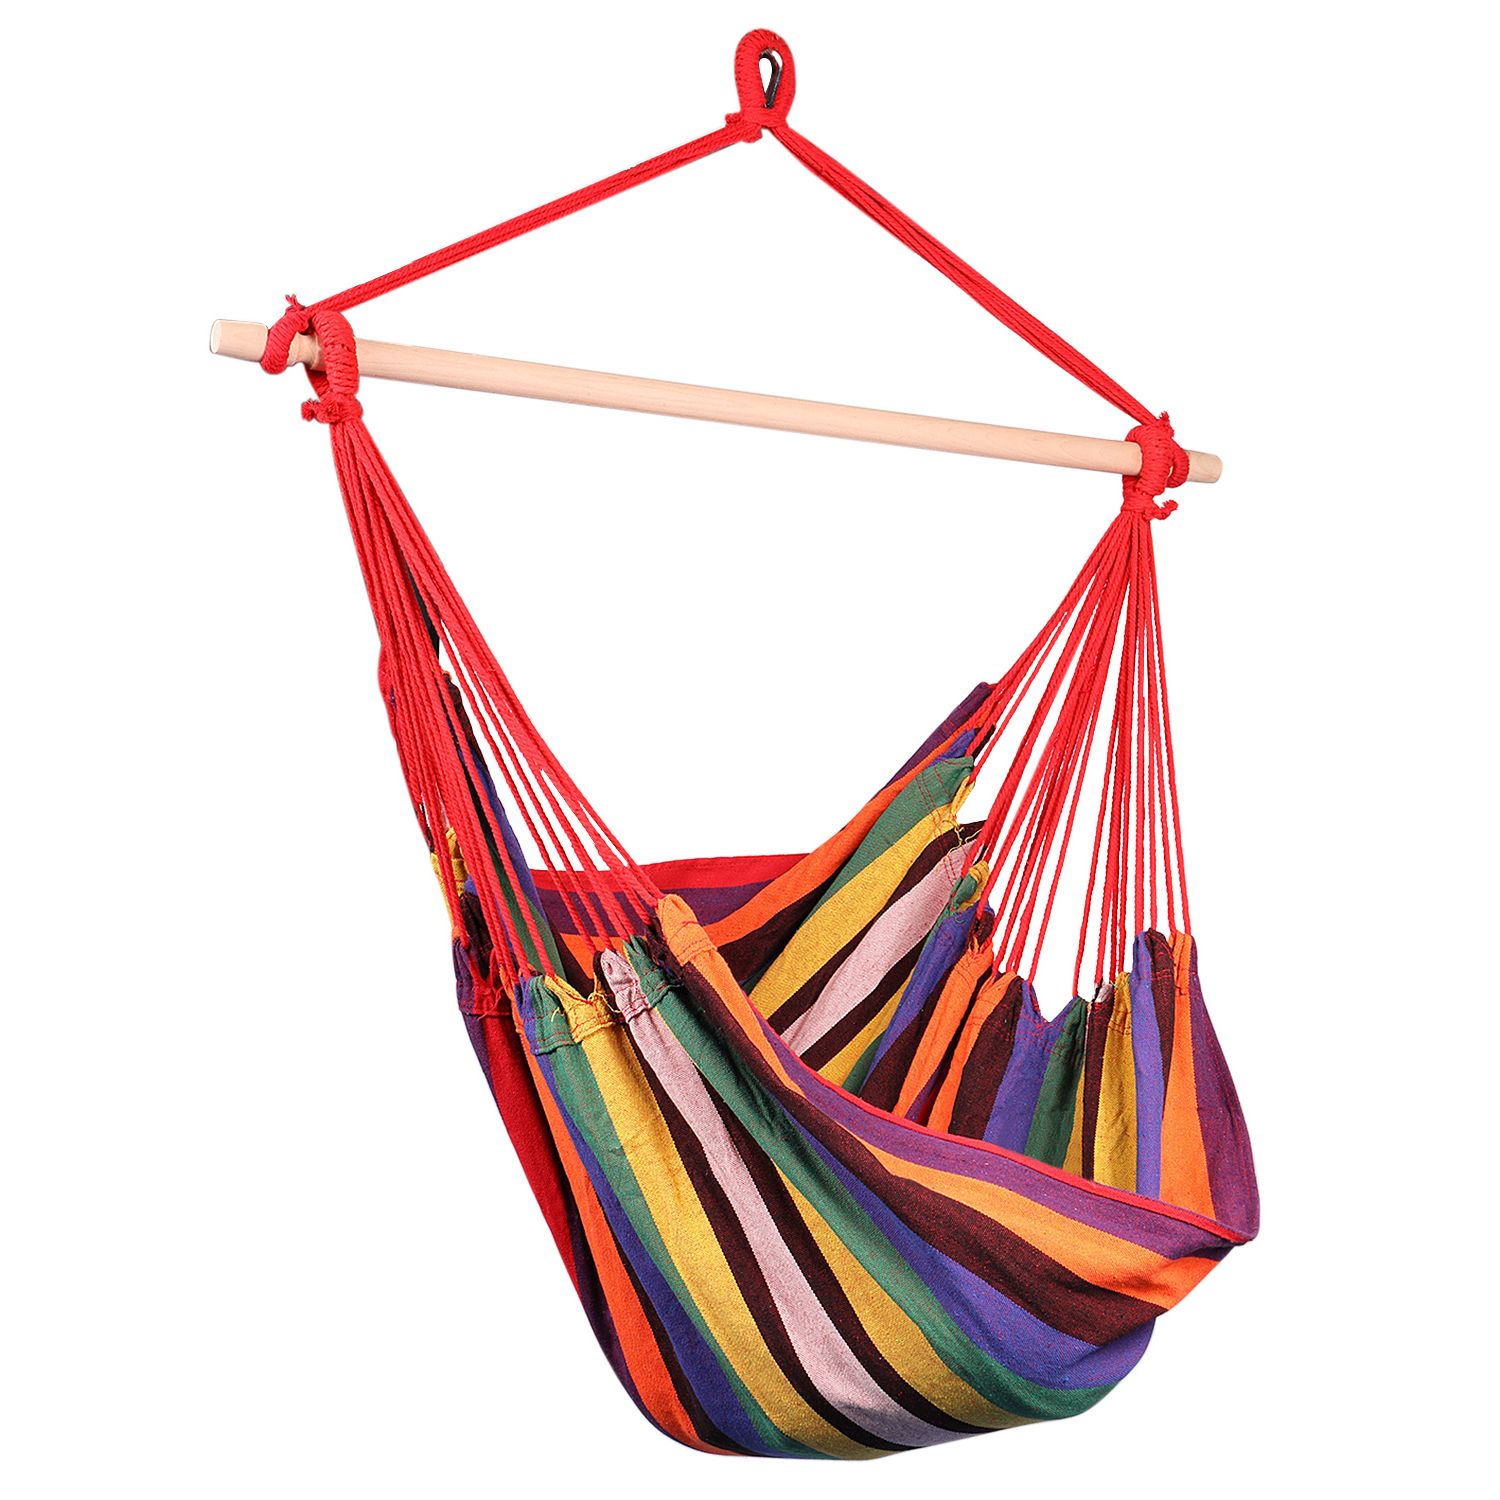 Details About Brazilian Hammock Chair, Cotton Weave Porch Swing W/ Spreader  Bar, Tropic Red In Most Recently Released Cotton Porch Swings (View 3 of 30)